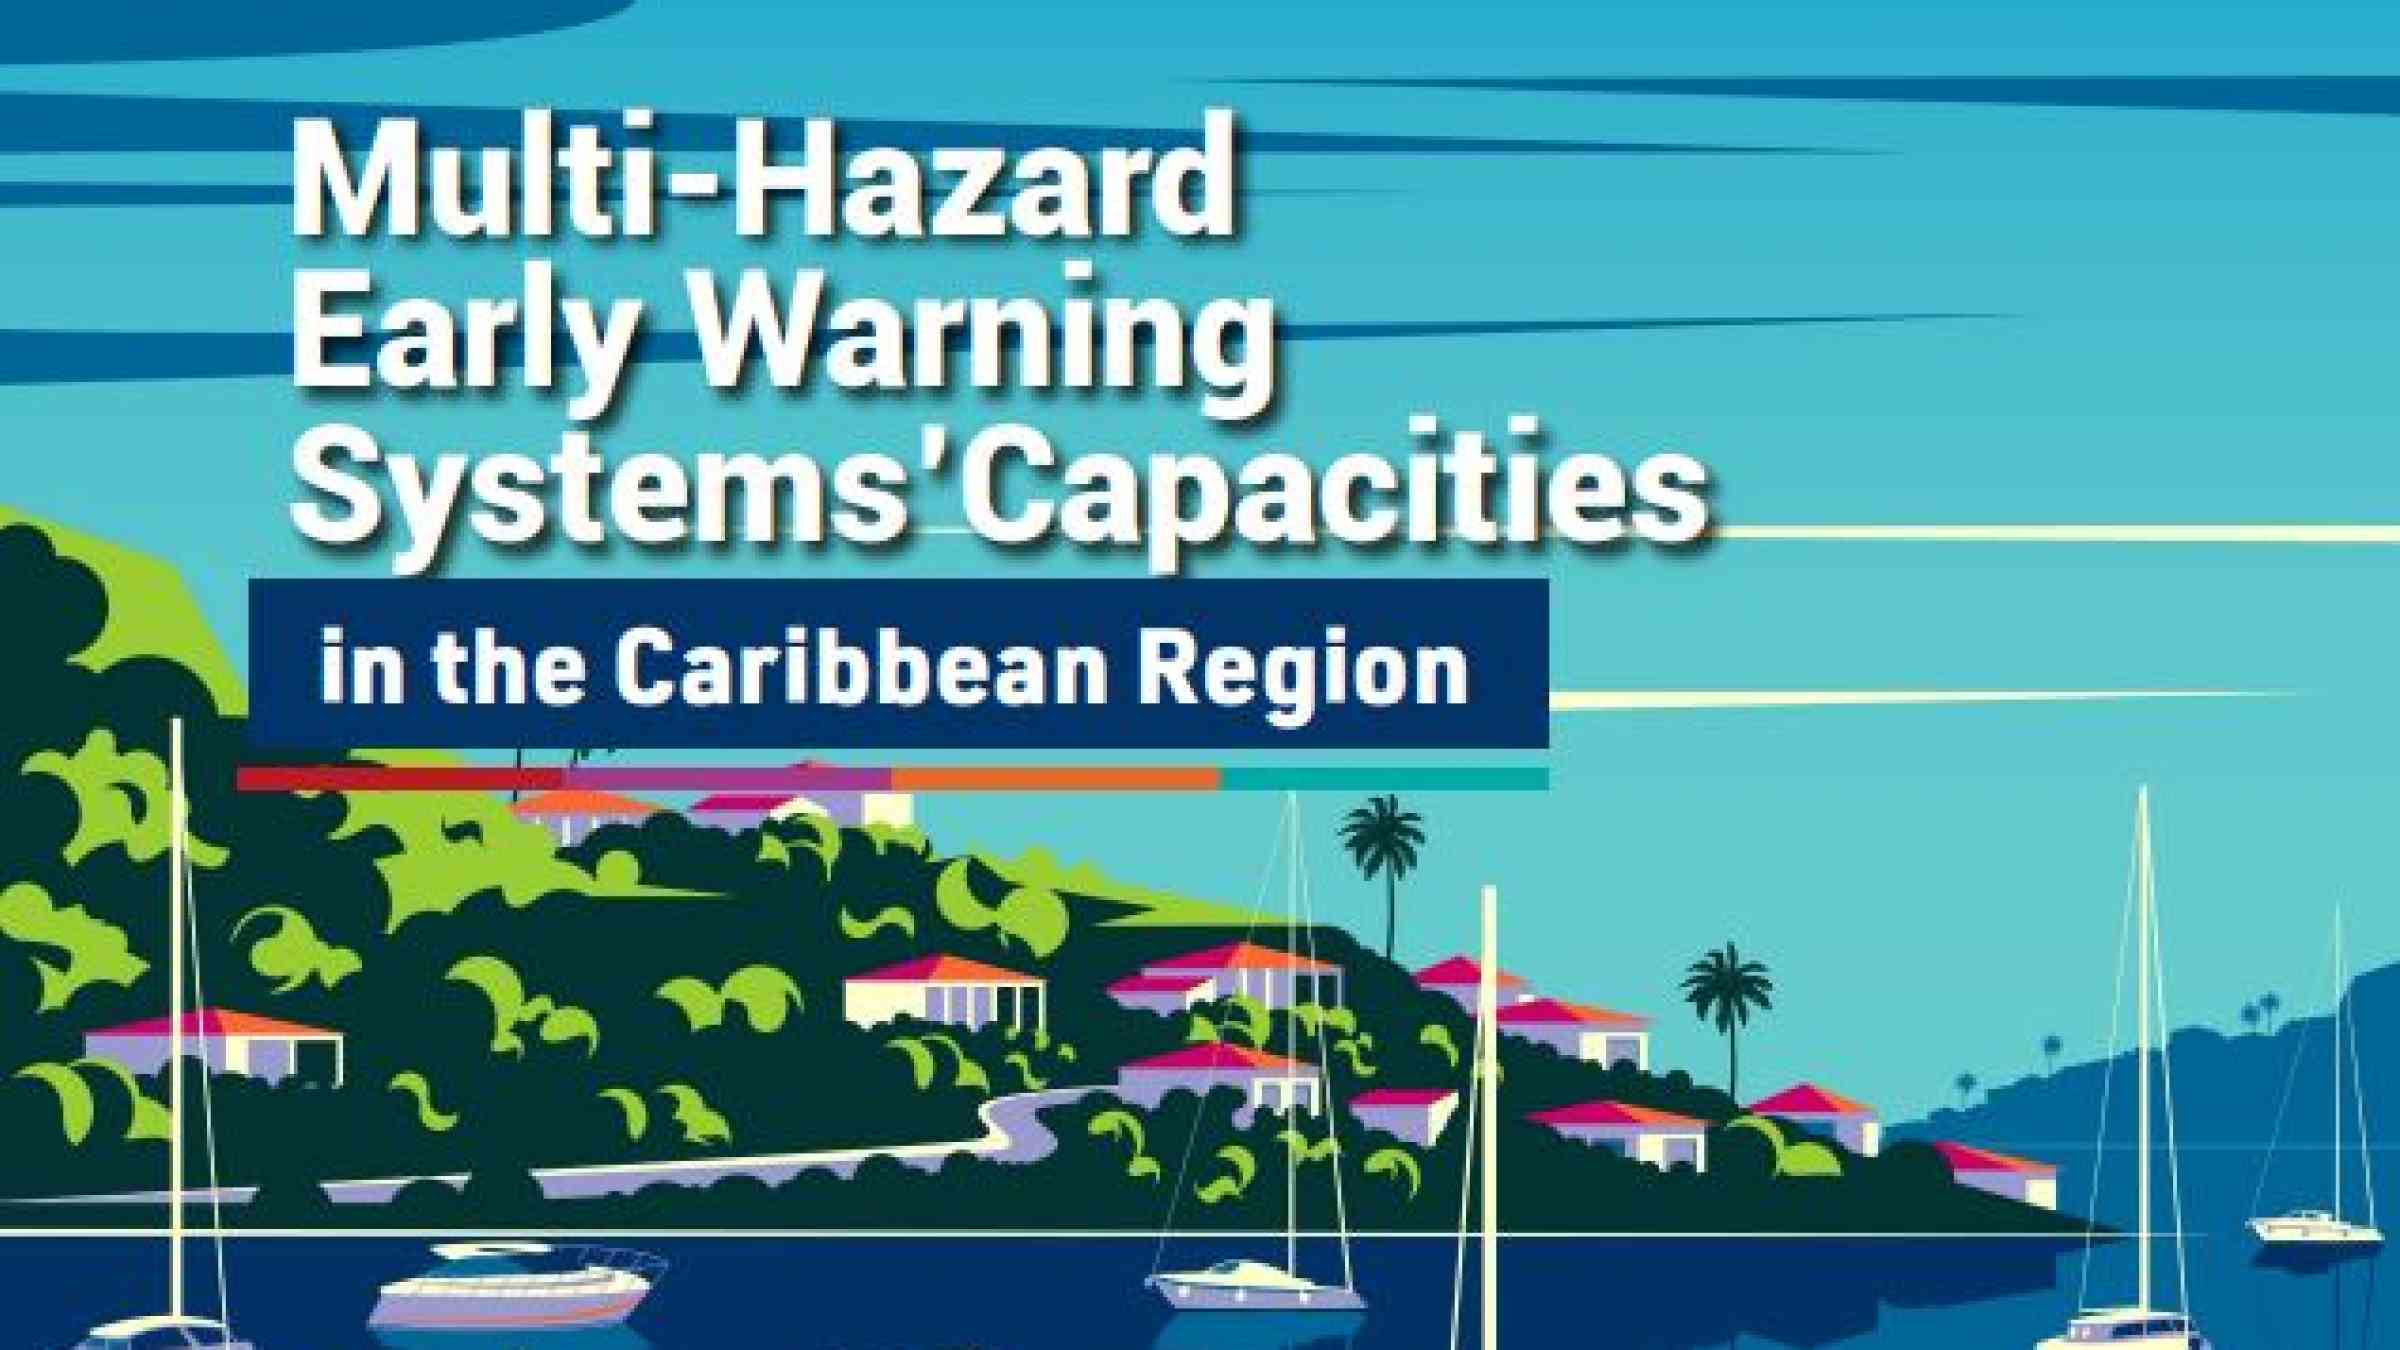 Multi-Hazard Early Warning Systems’Capacities in the Caribbean Region